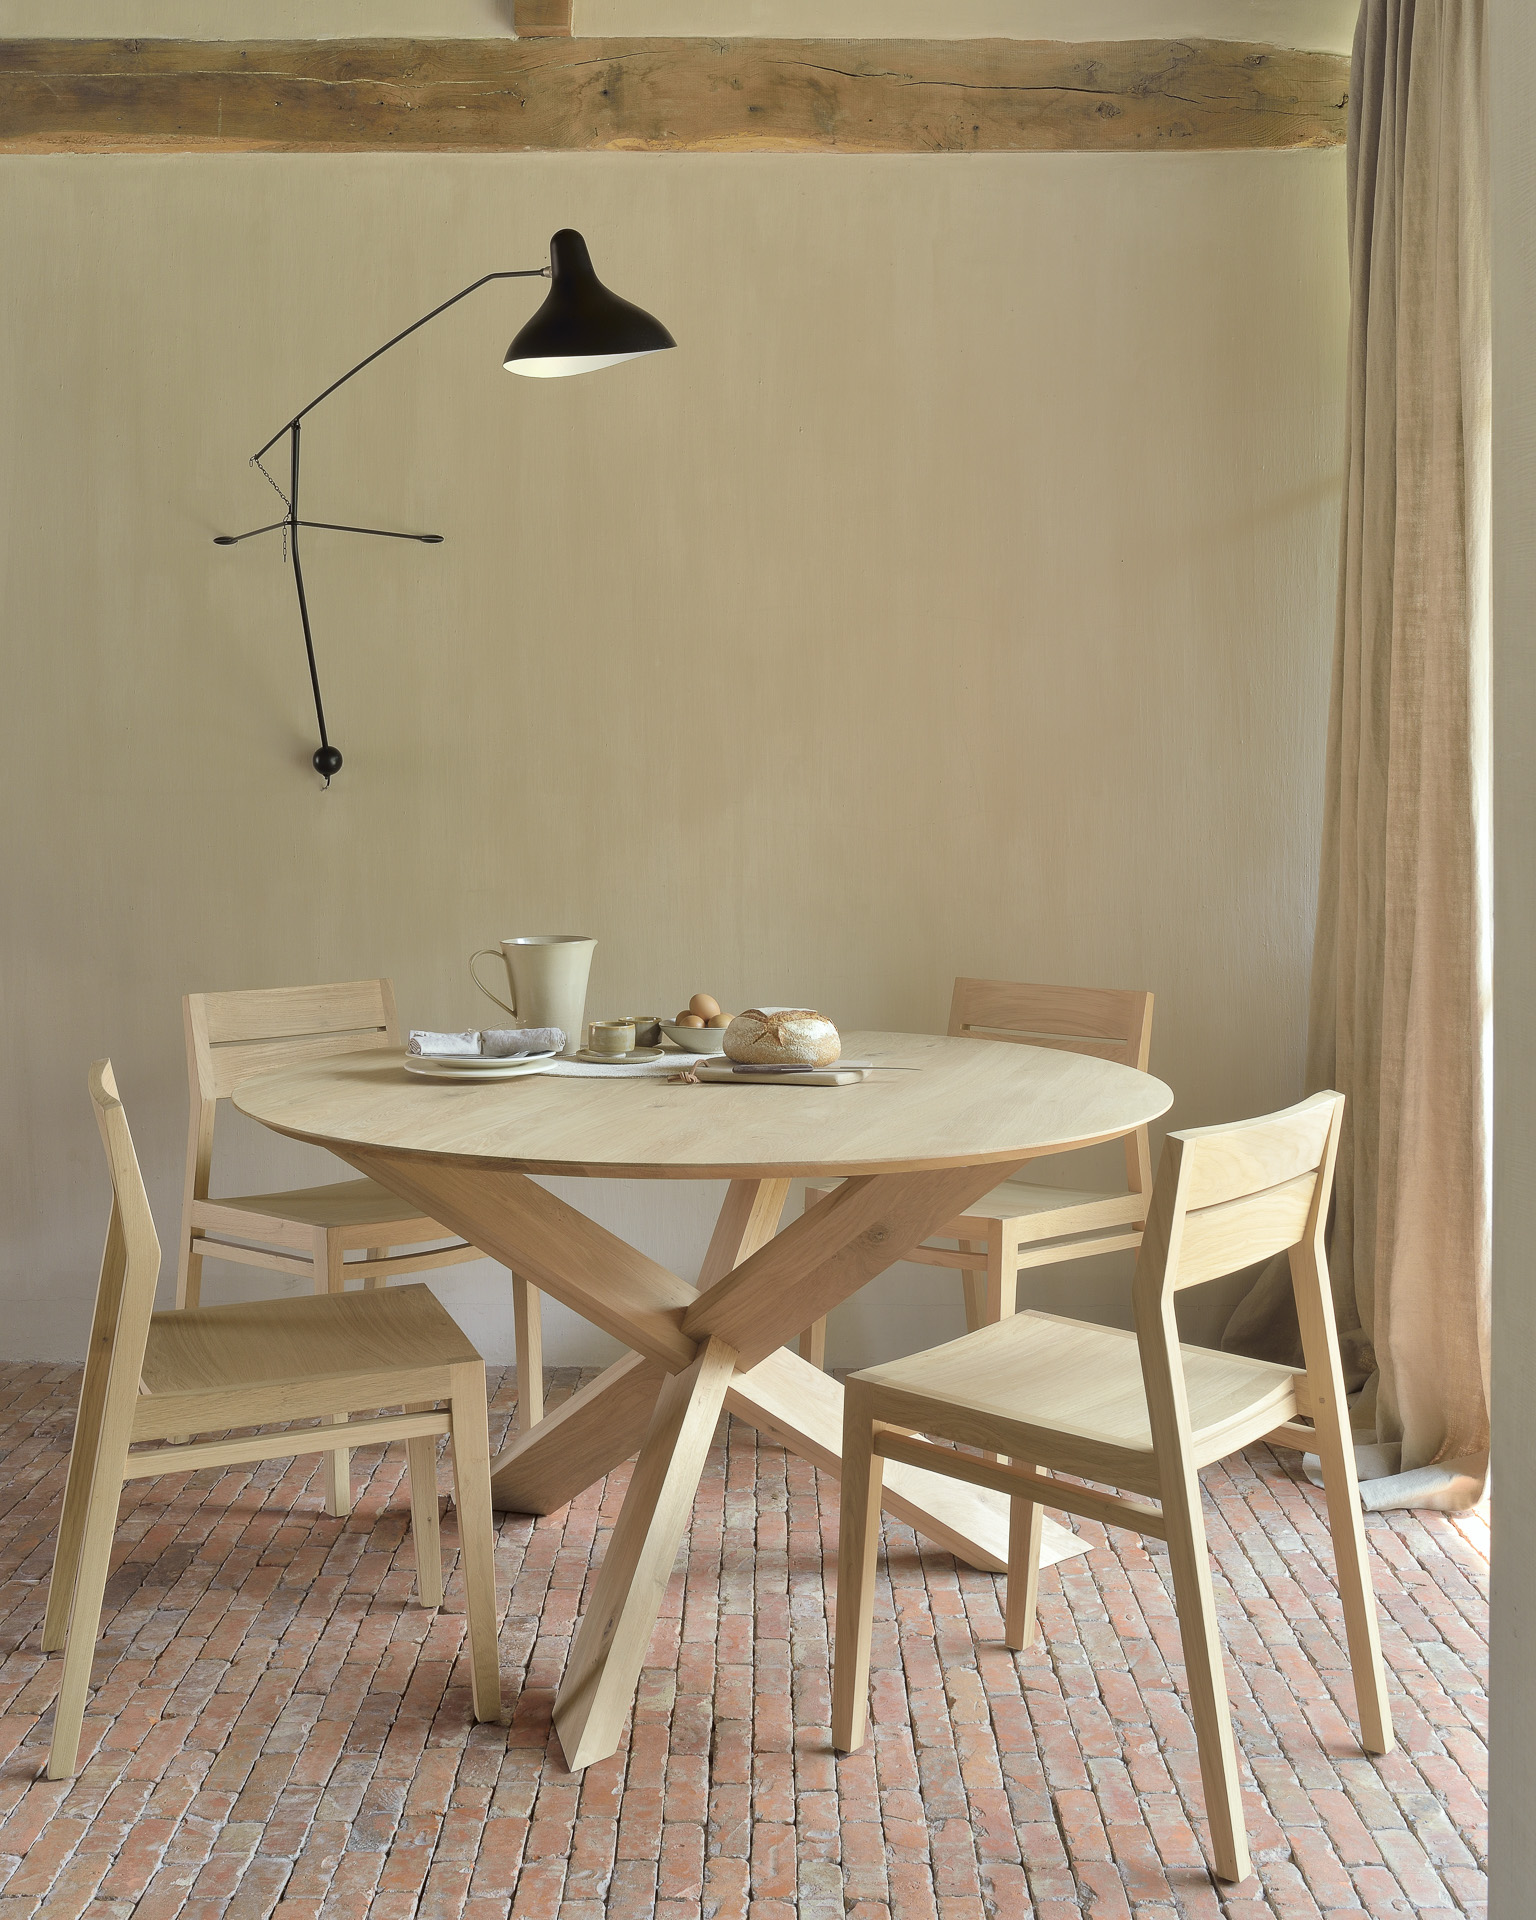 Ethnicraft Oak Circle Dining Table